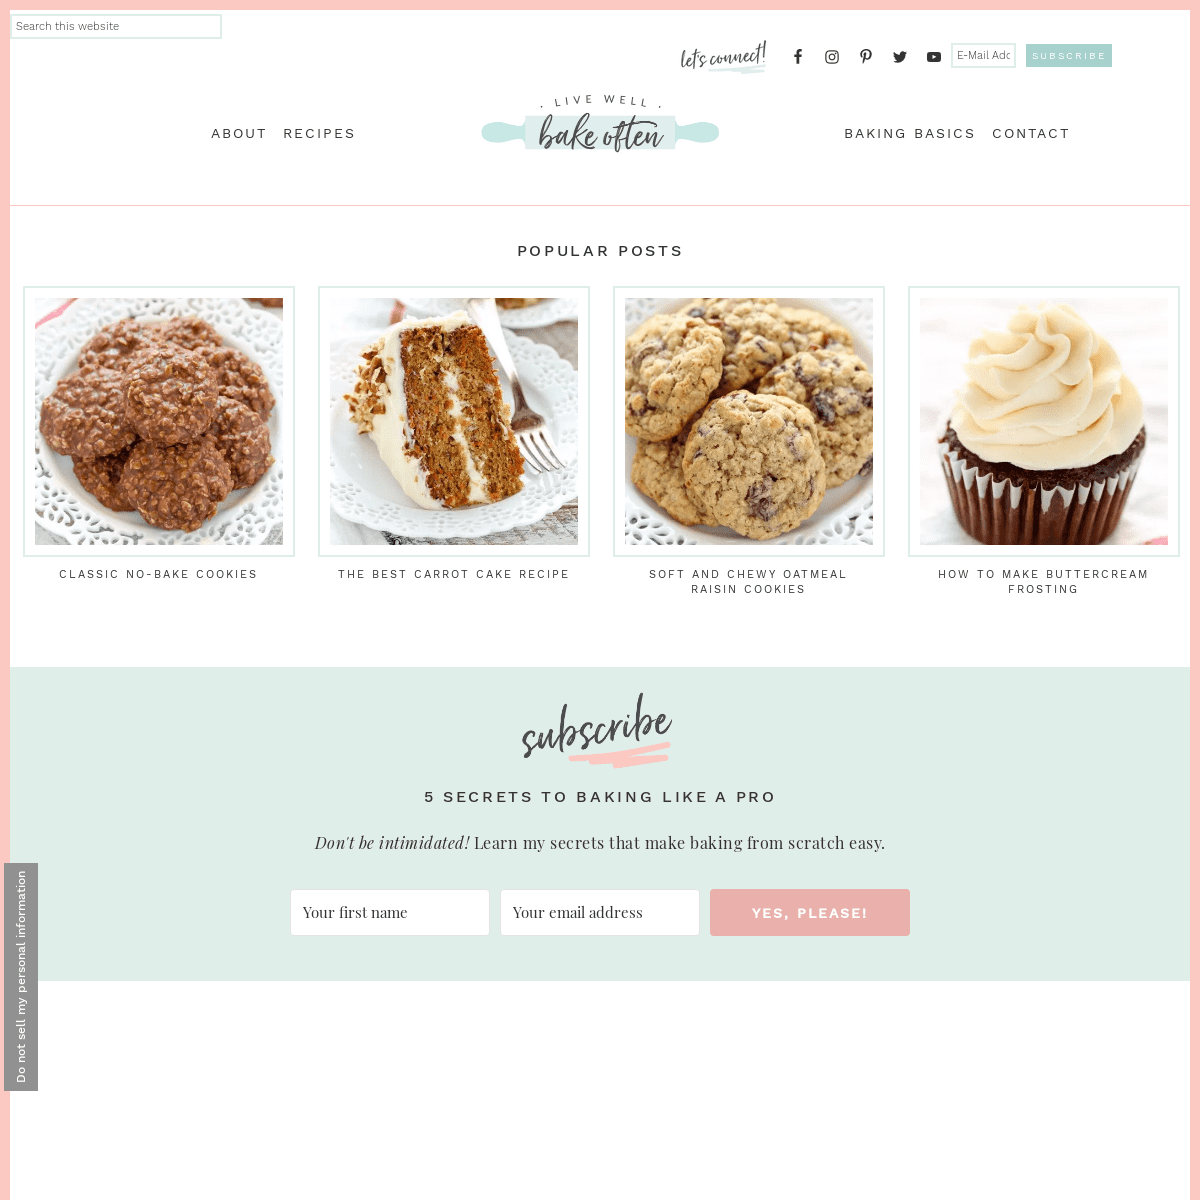 A complete backup of livewellbakeoften.com